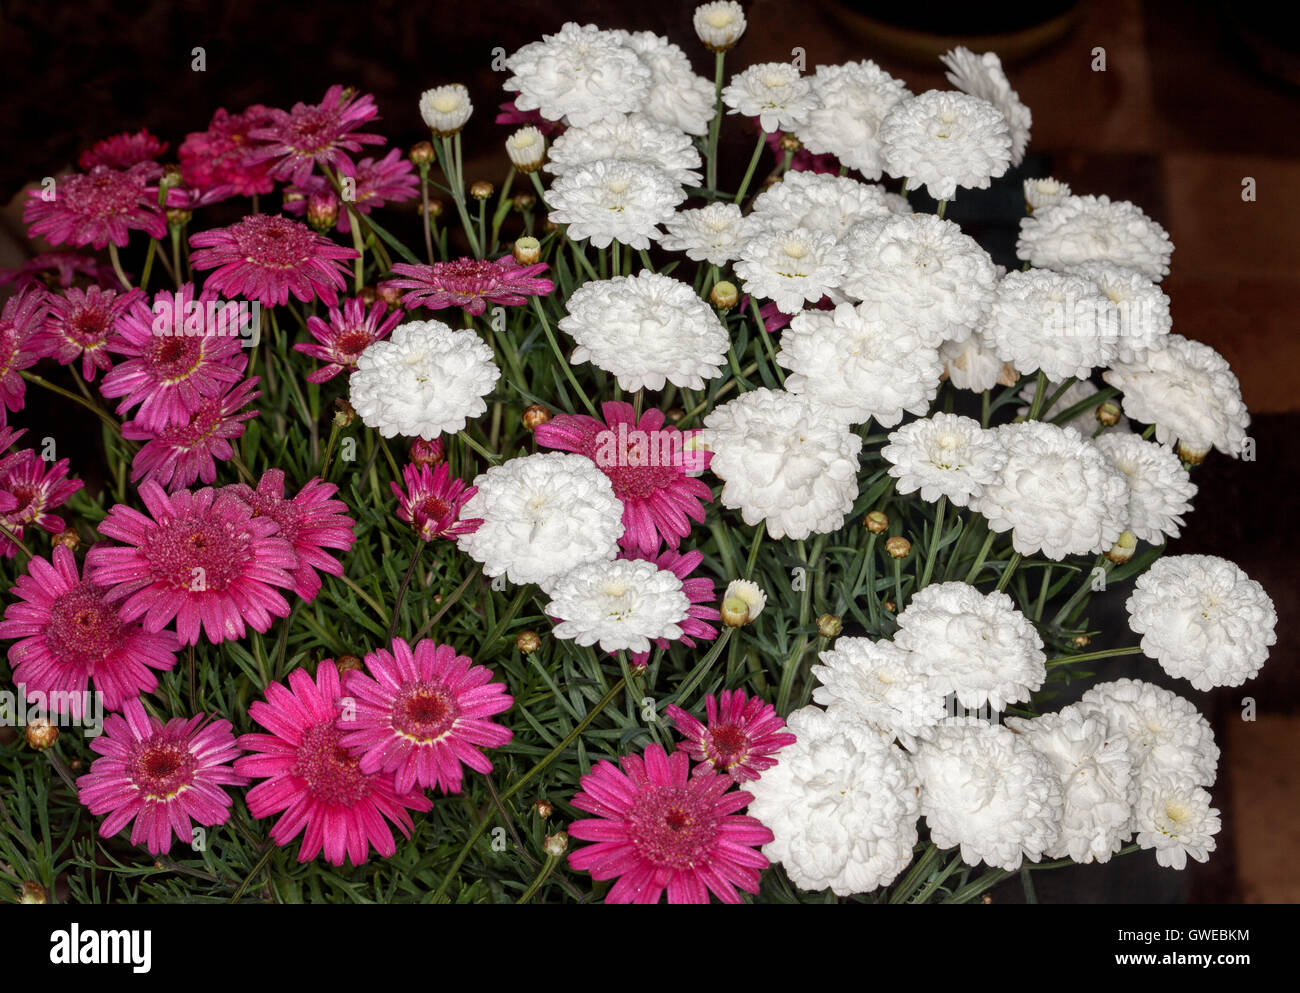 Large cluster of stunning red & white flowers, buds & leaves of Argyranthemum frutescens, perennial daisies on dark background Stock Photo